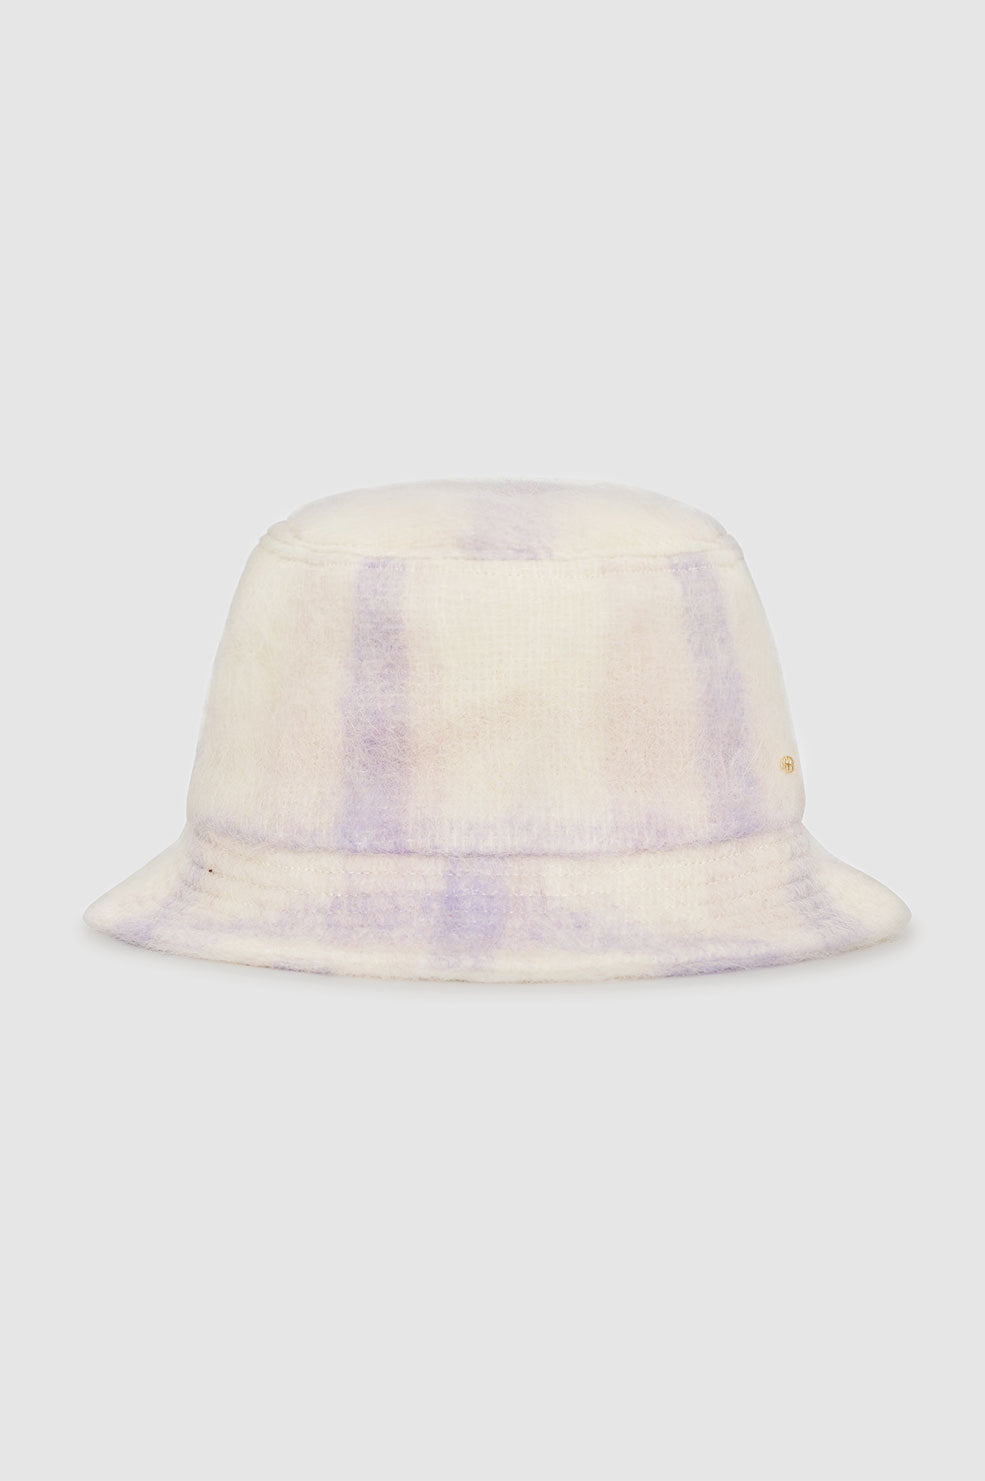 ANINE BING Cami Bucket Hat - Lavender And Cream Check - Front View